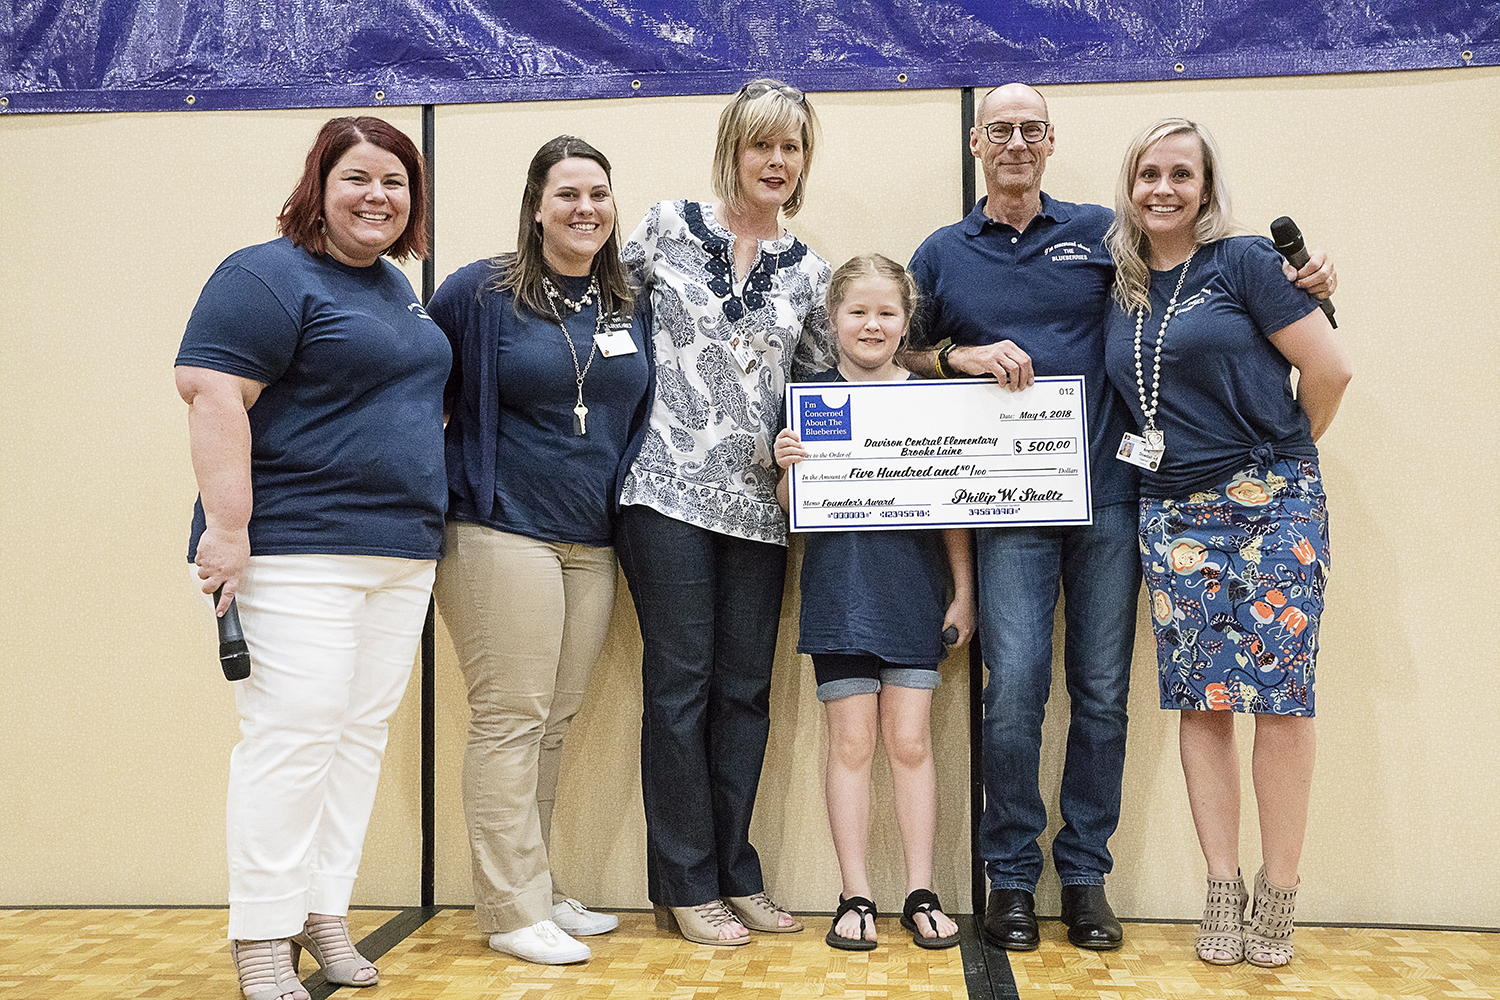 Flint, MI - Friday, May 4, 2018: Surrounded by family, teachers and Blueberry staff, Davison Central Elementary School student Brooke Laine holds a large check after being presented with the Blueberry Ambassador Founder's Award during the 5th Annual 